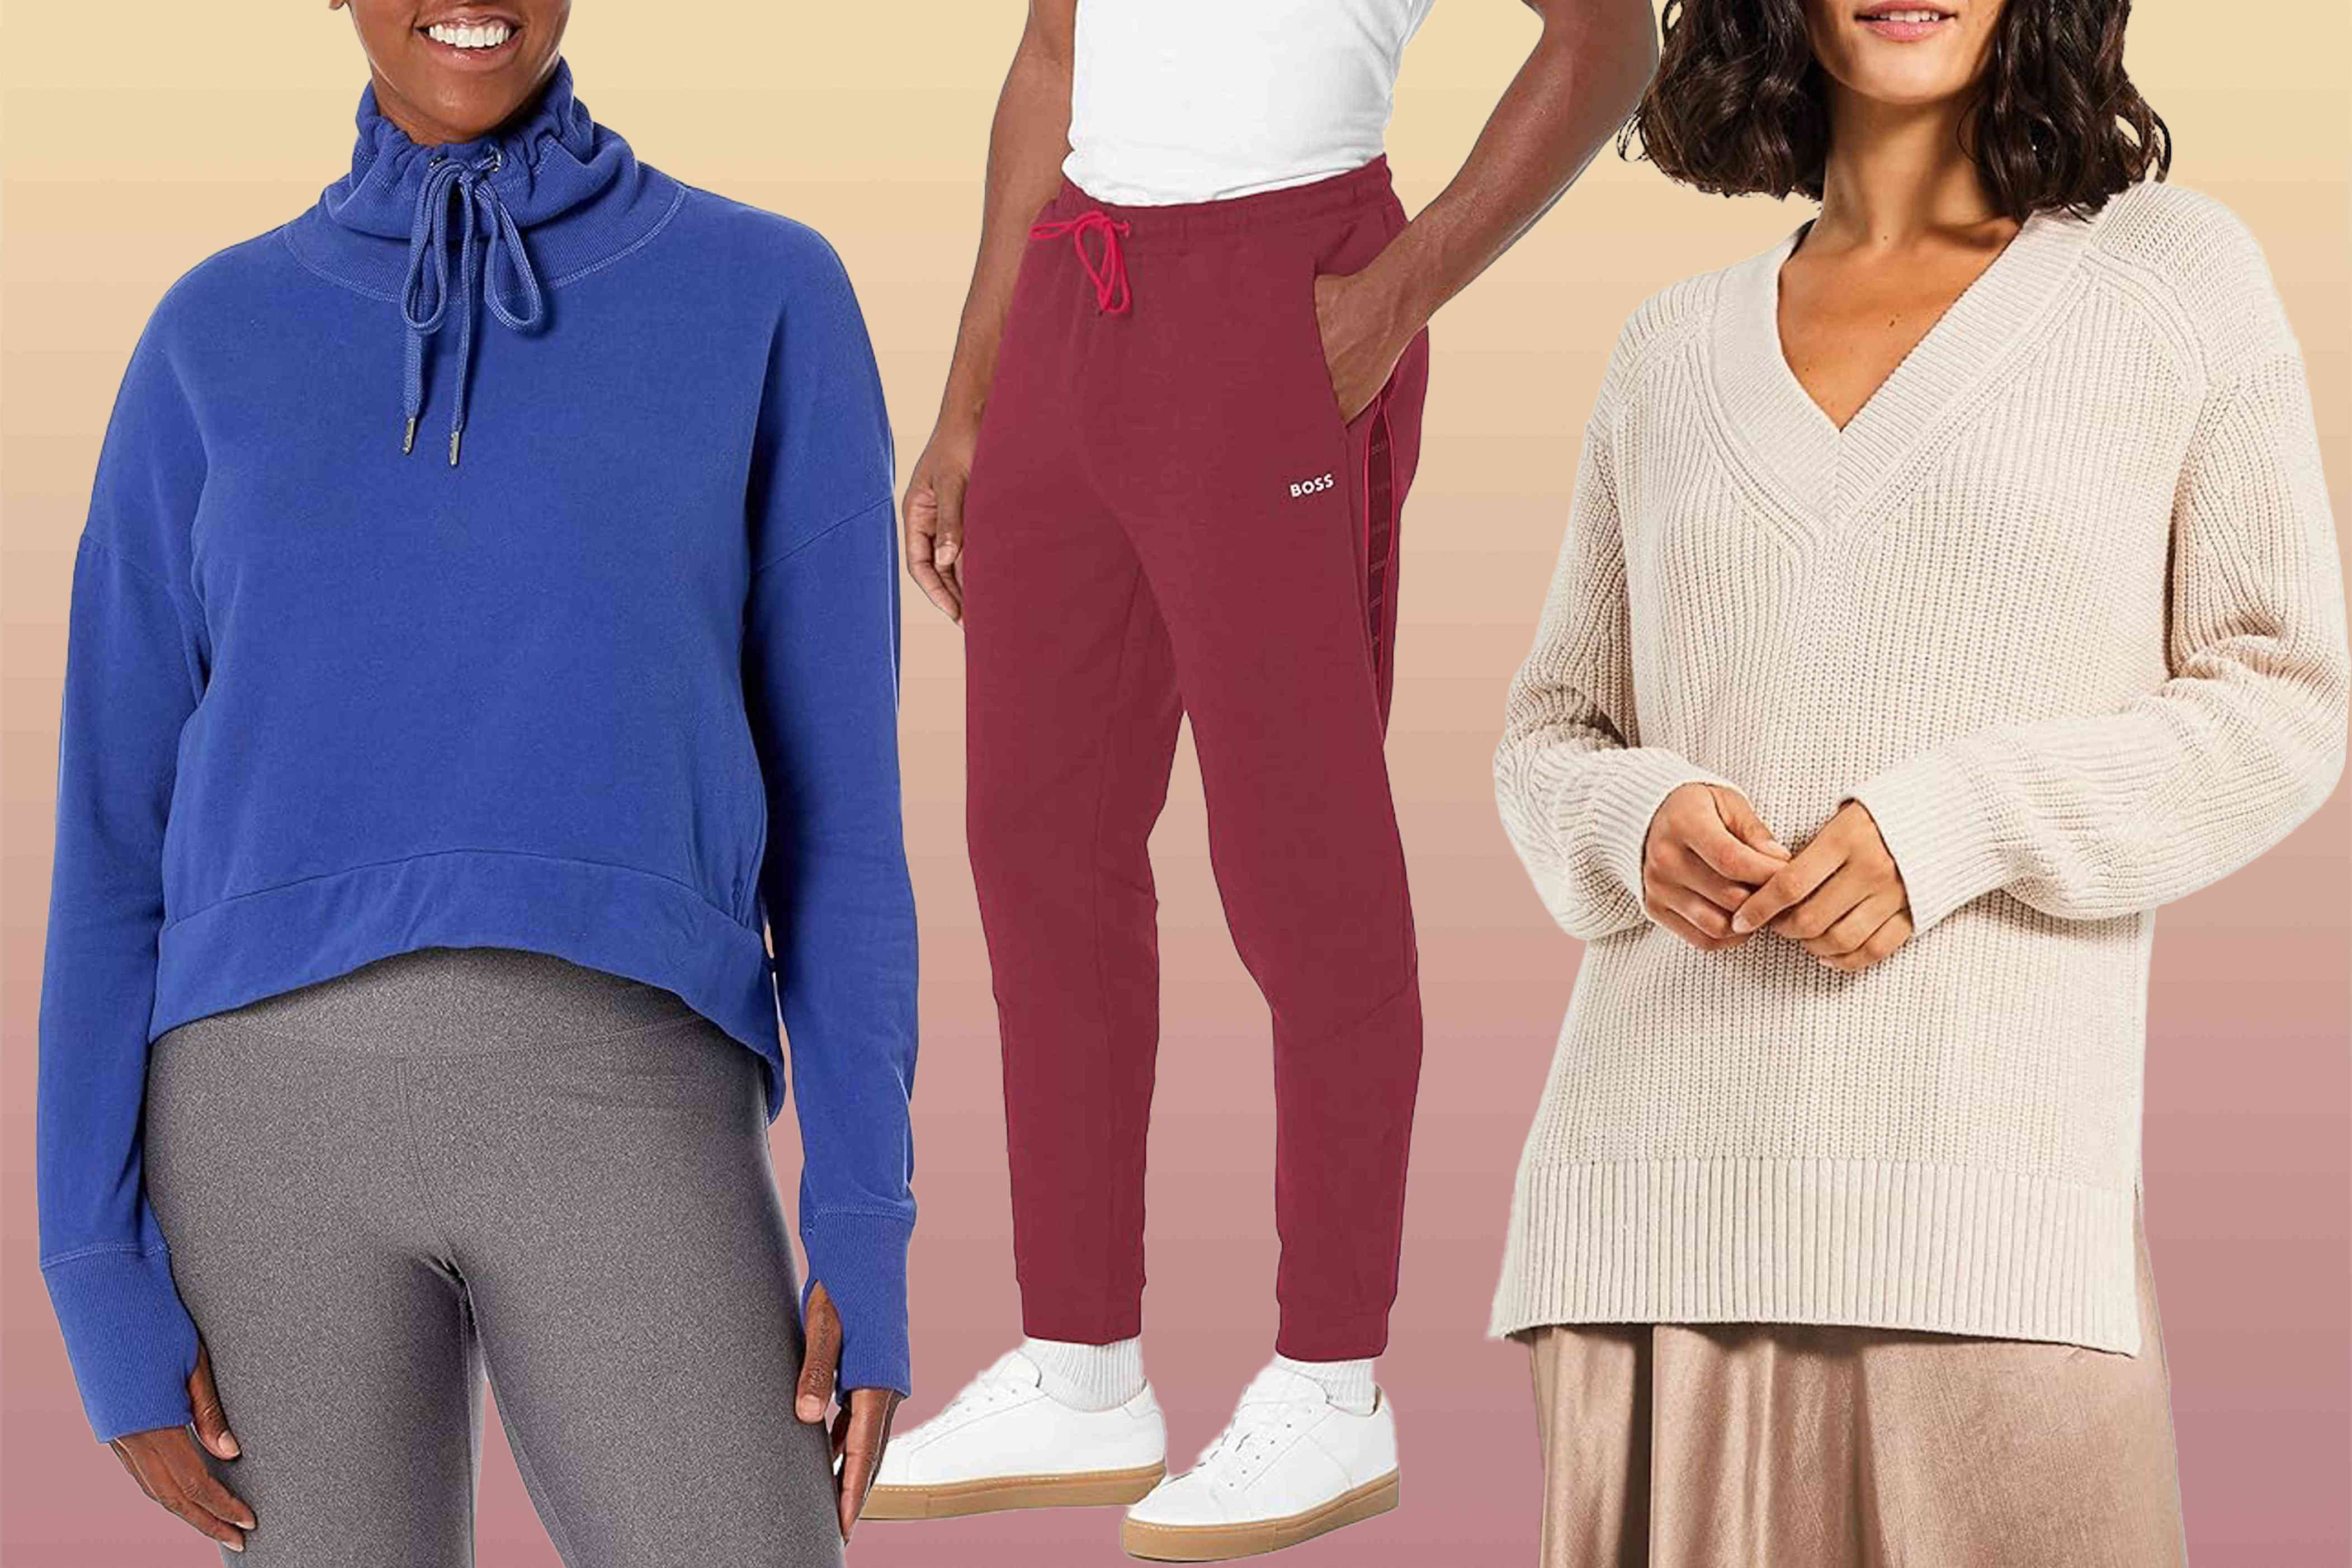 amazon, 12 travel clothing deals you can only score at amazon’s hidden fashion outlet — up to 83% off